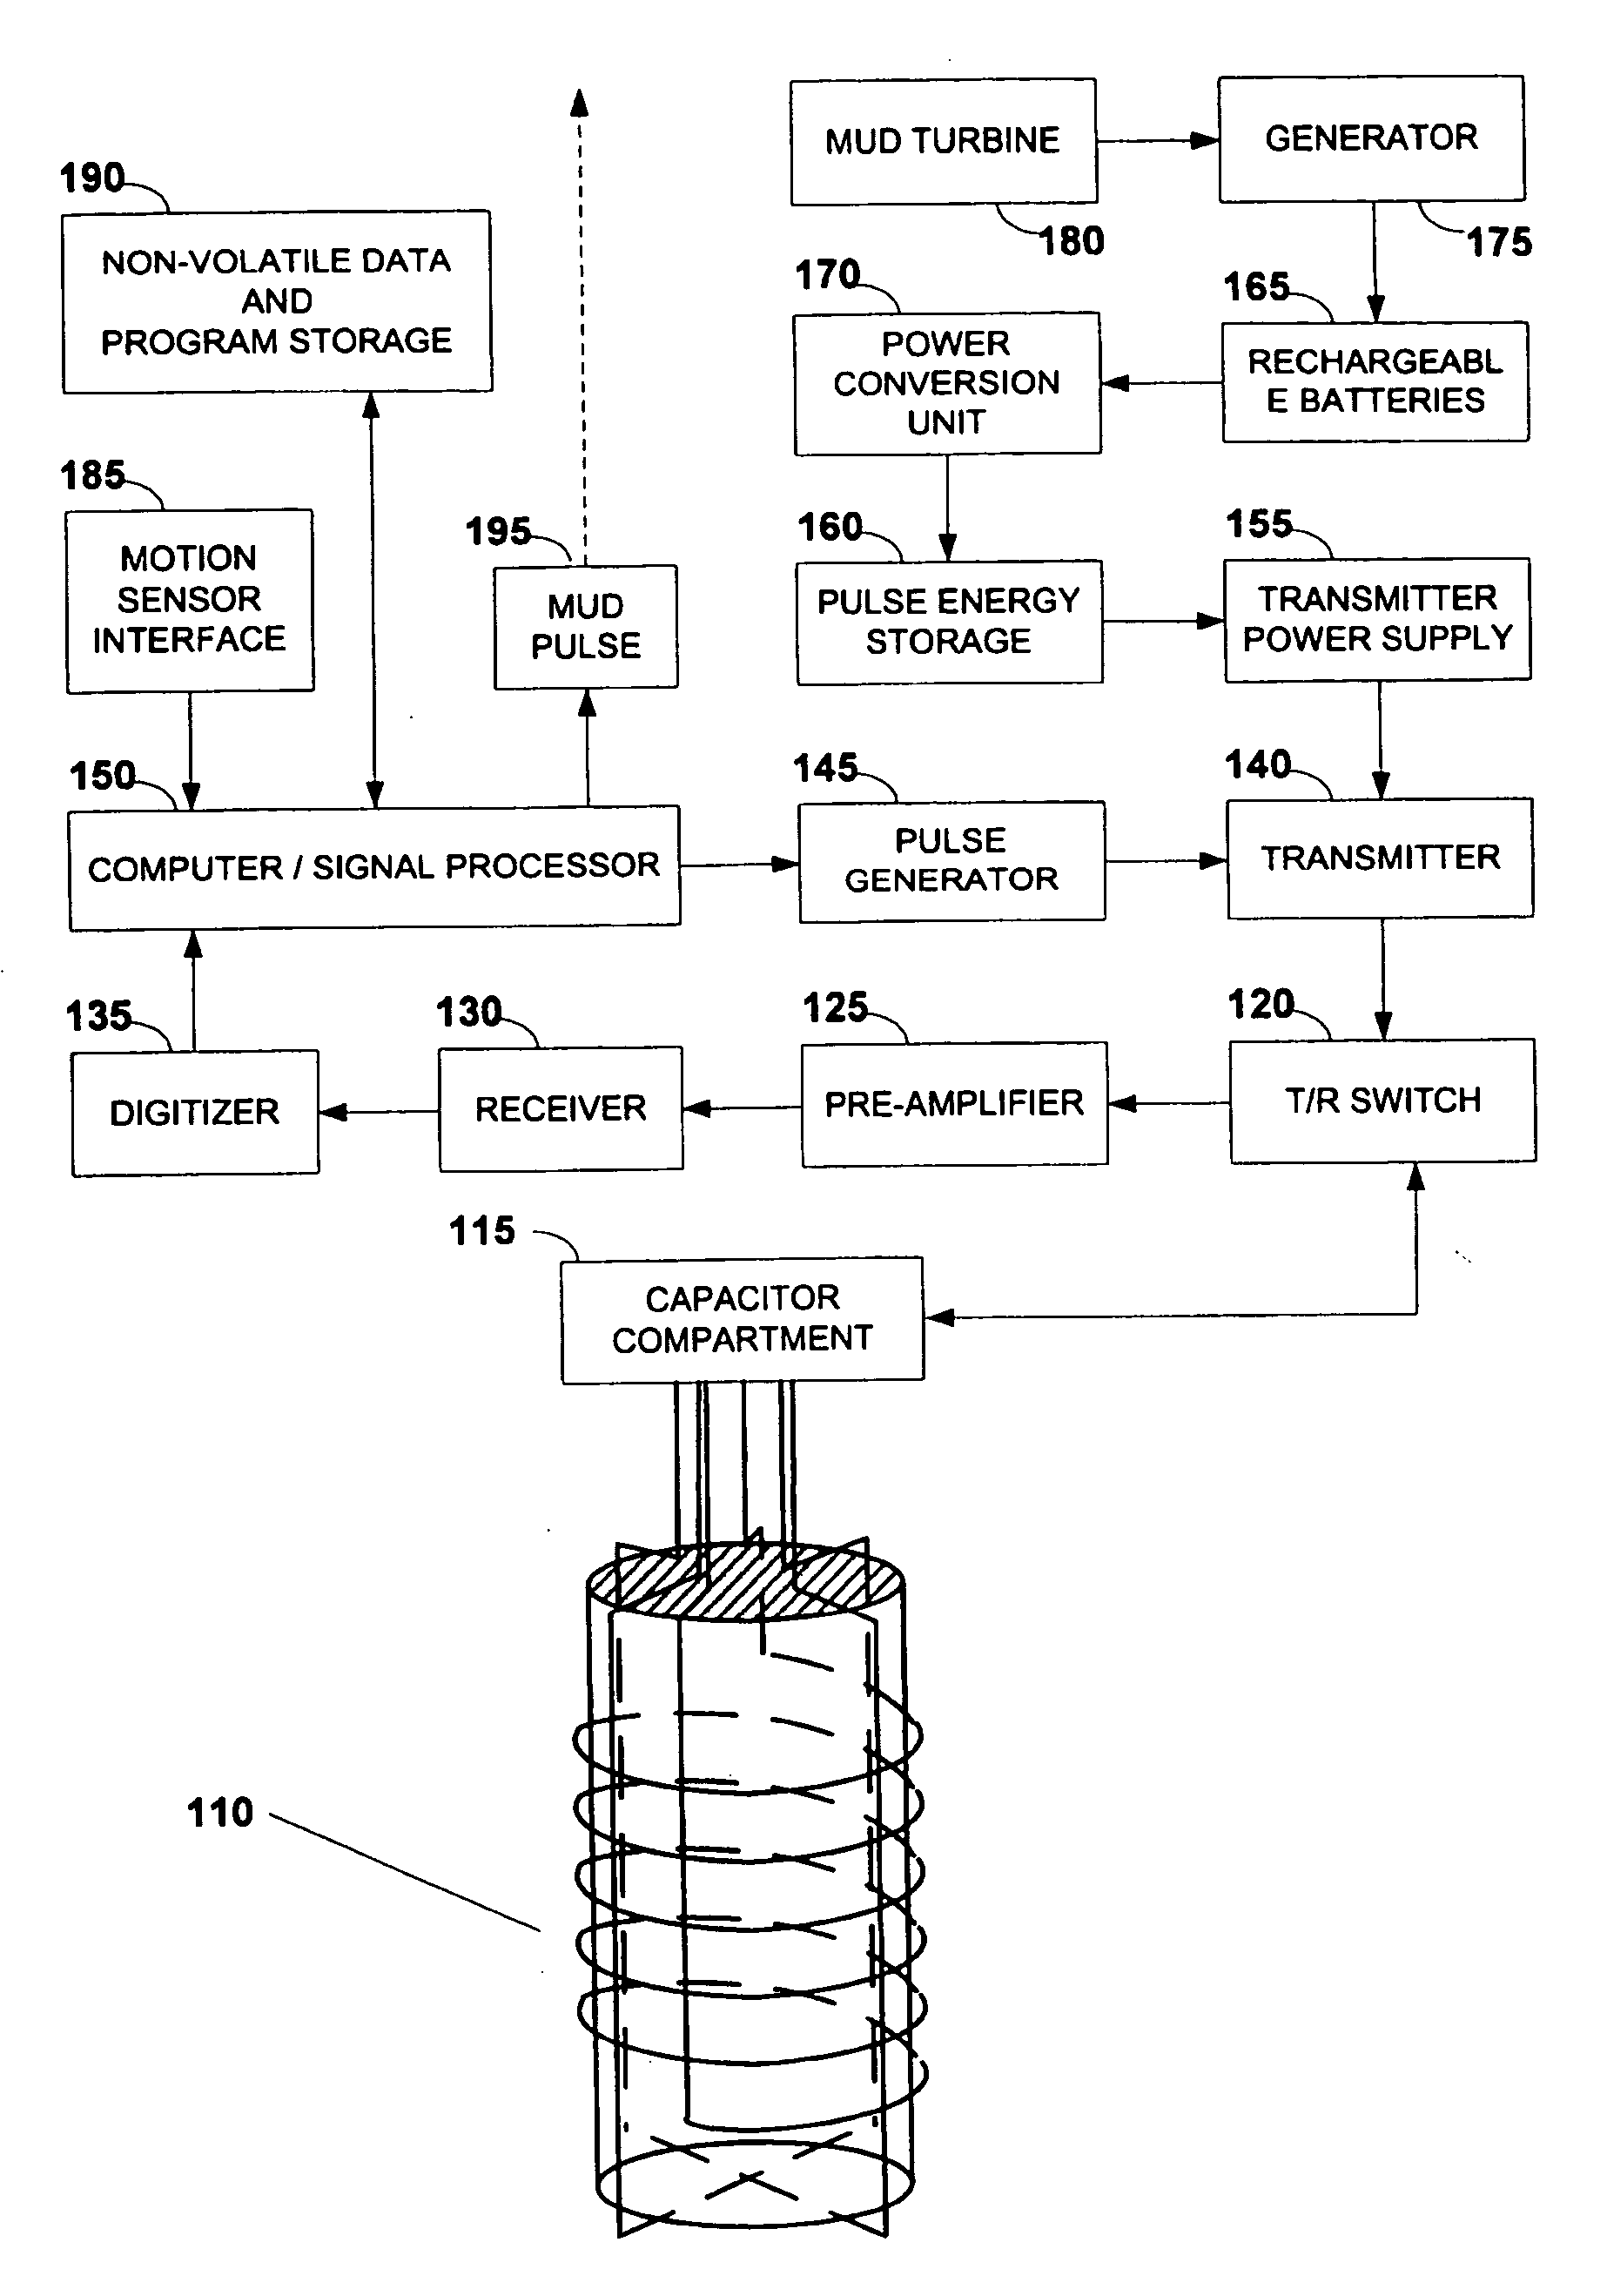 Systems and methods for NMR logging